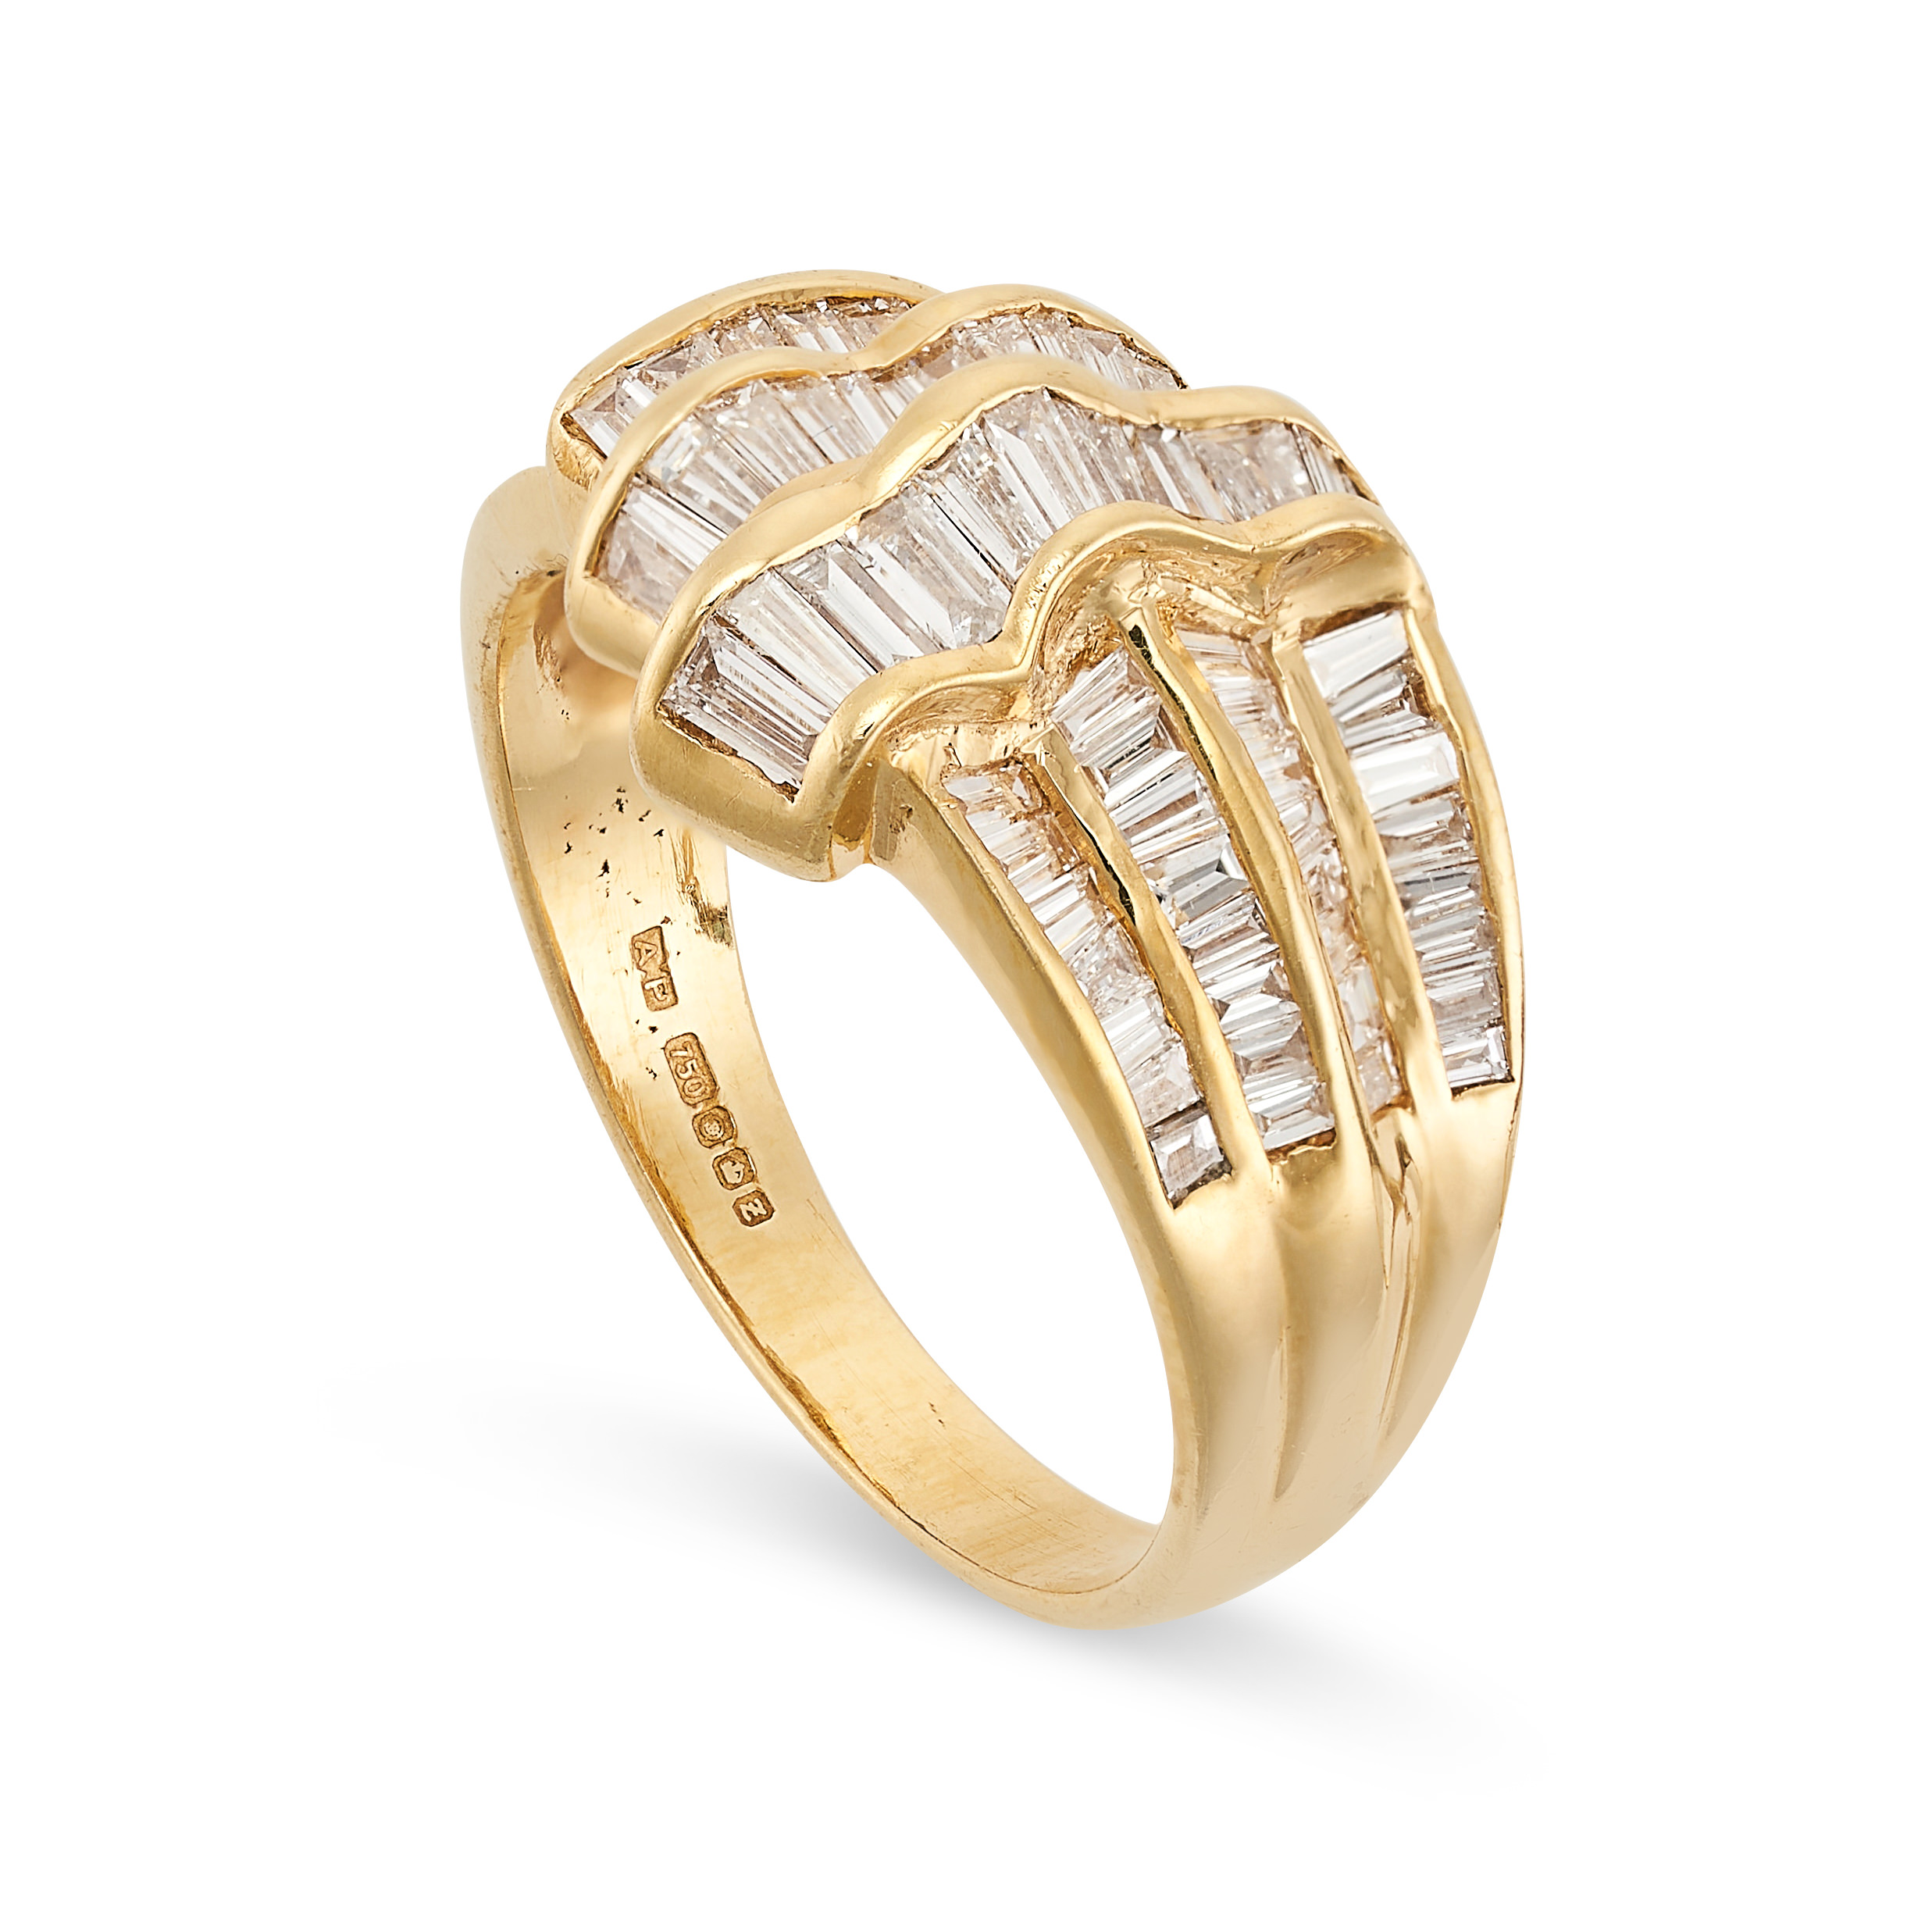 A DIAMOND DRESS RING in 18ct yellow gold, set with baguette and tapered baguette cut diamonds, - Image 2 of 2